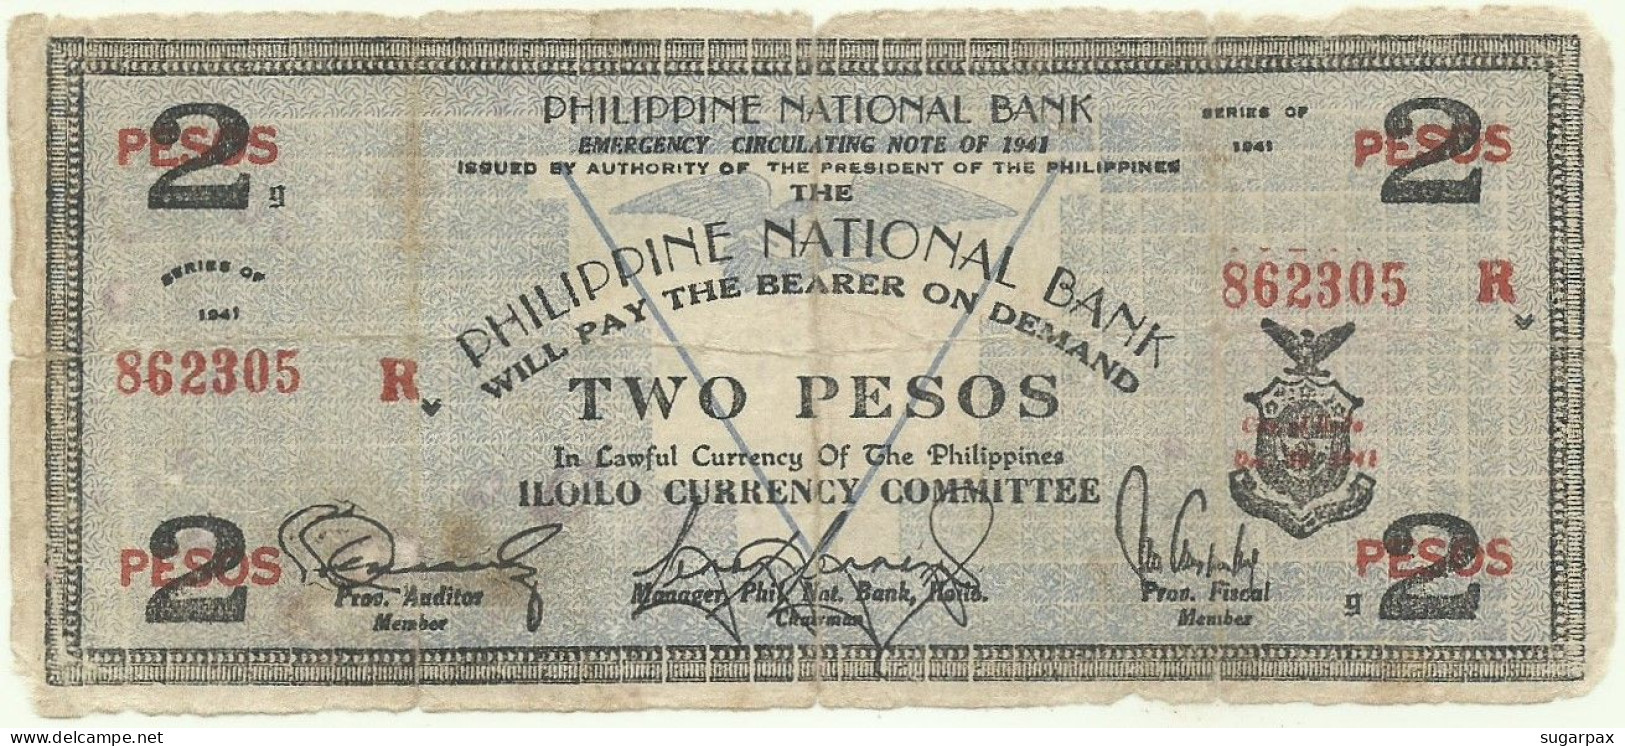 PHILIPPINES - 2 Pesos - 1941 - Pick S 306 - Serie R - ILOILO Currency Committee - Philippinen